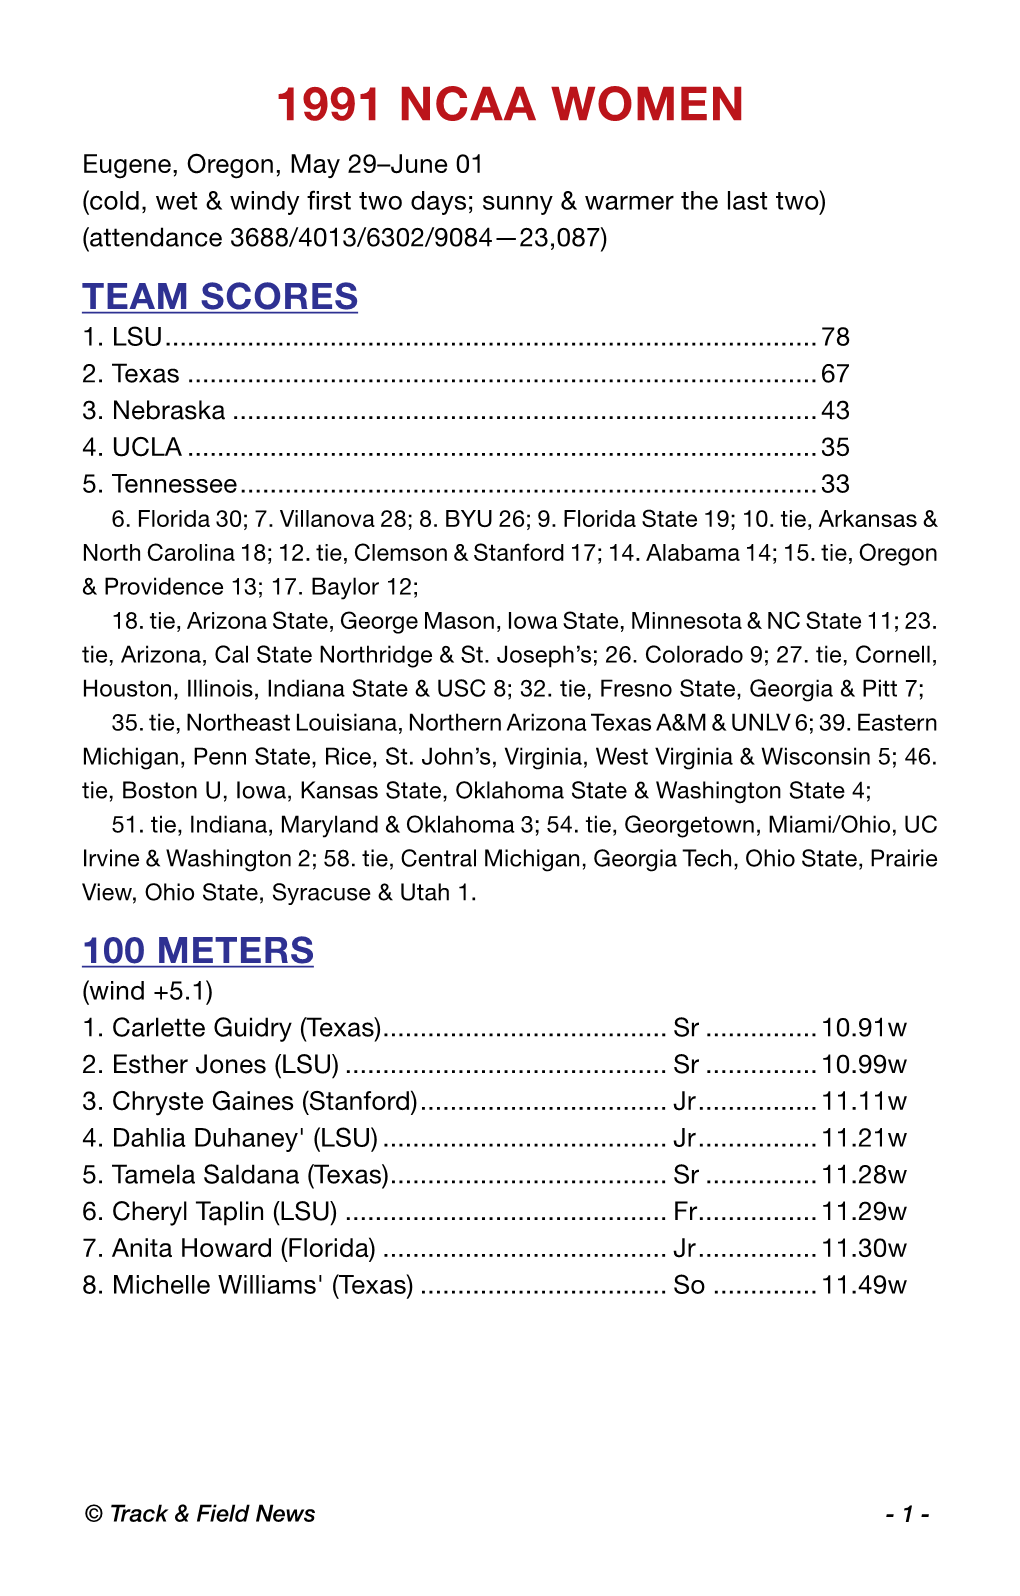 1991 NCAA Women Eugene, Oregon, May 29–June 01 (Cold, Wet & Windy First Two Days; Sunny & Warmer the Last Two) (Attendance 3688/4013/6302/9084—23,087) Team Scores 1